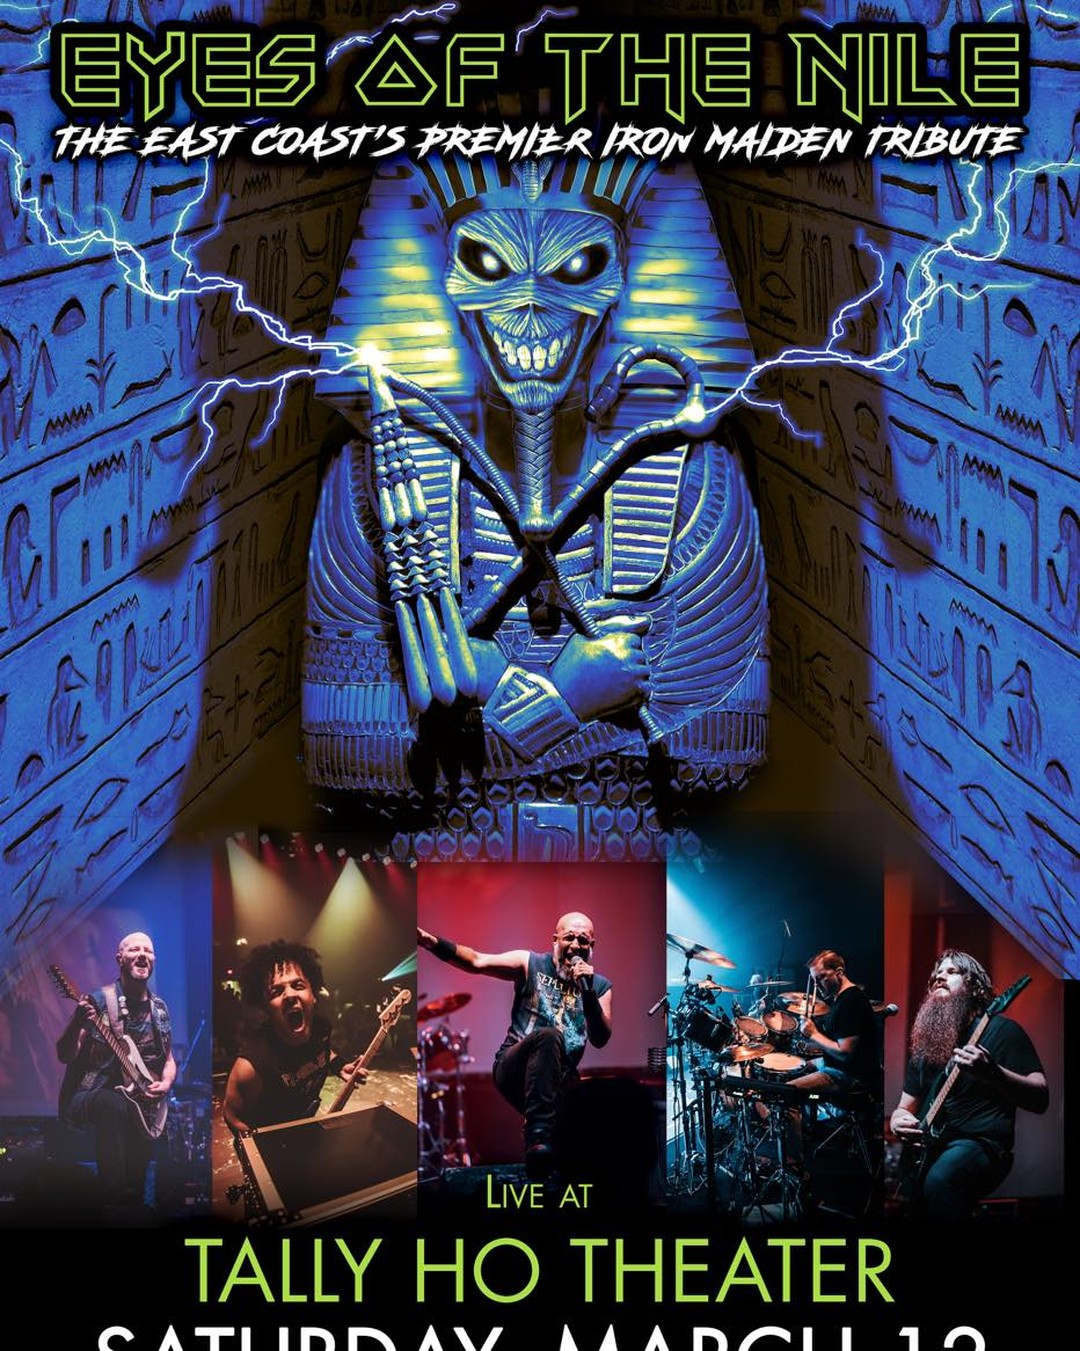 Eyes of the Nile - Iron Maiden Tribute is coming to town Saturday! More info: https://www.ticketweb.com/event/a-tribute-to-iron-maiden-tally-ho-theater-tickets/11512795